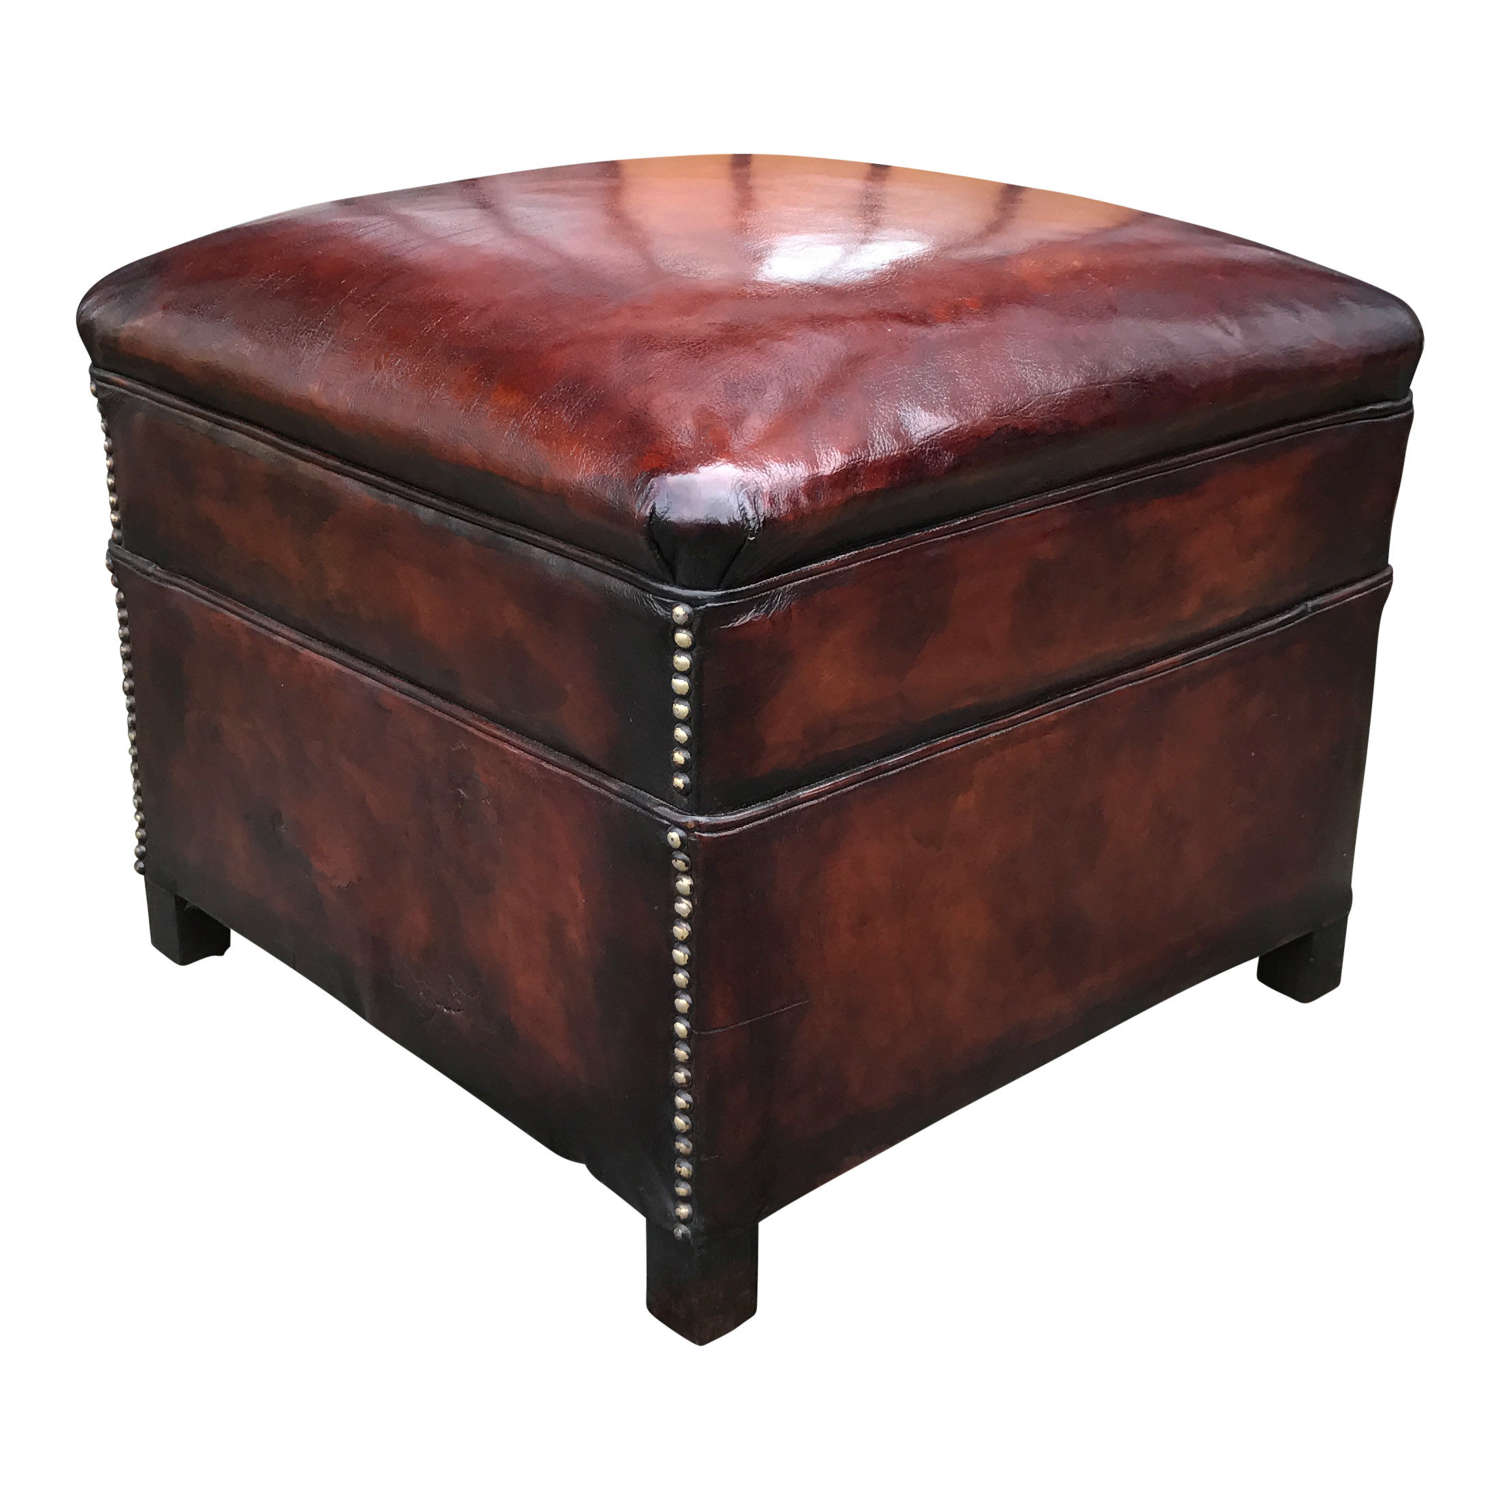 A stunning mid 20th Century studded conker brown leather footstool